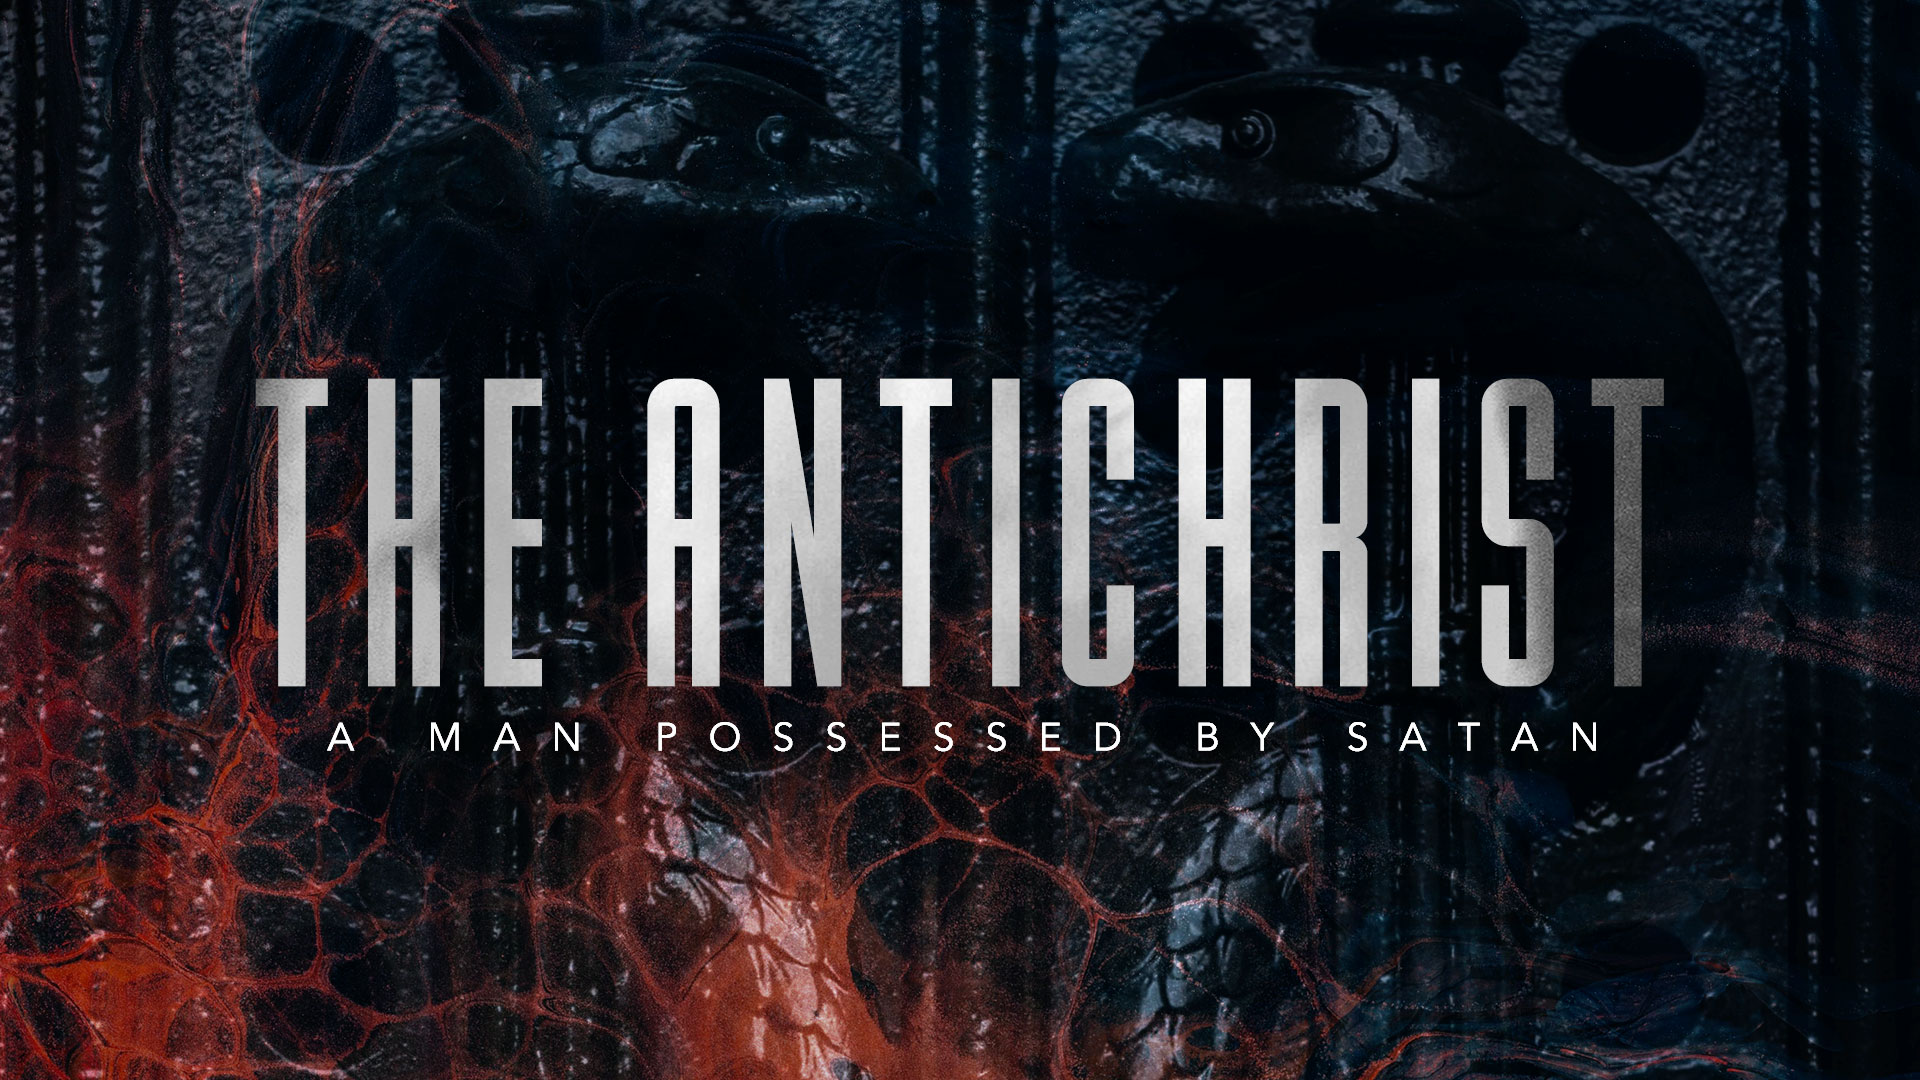 The Antichrist – A Man Possessed By Satan